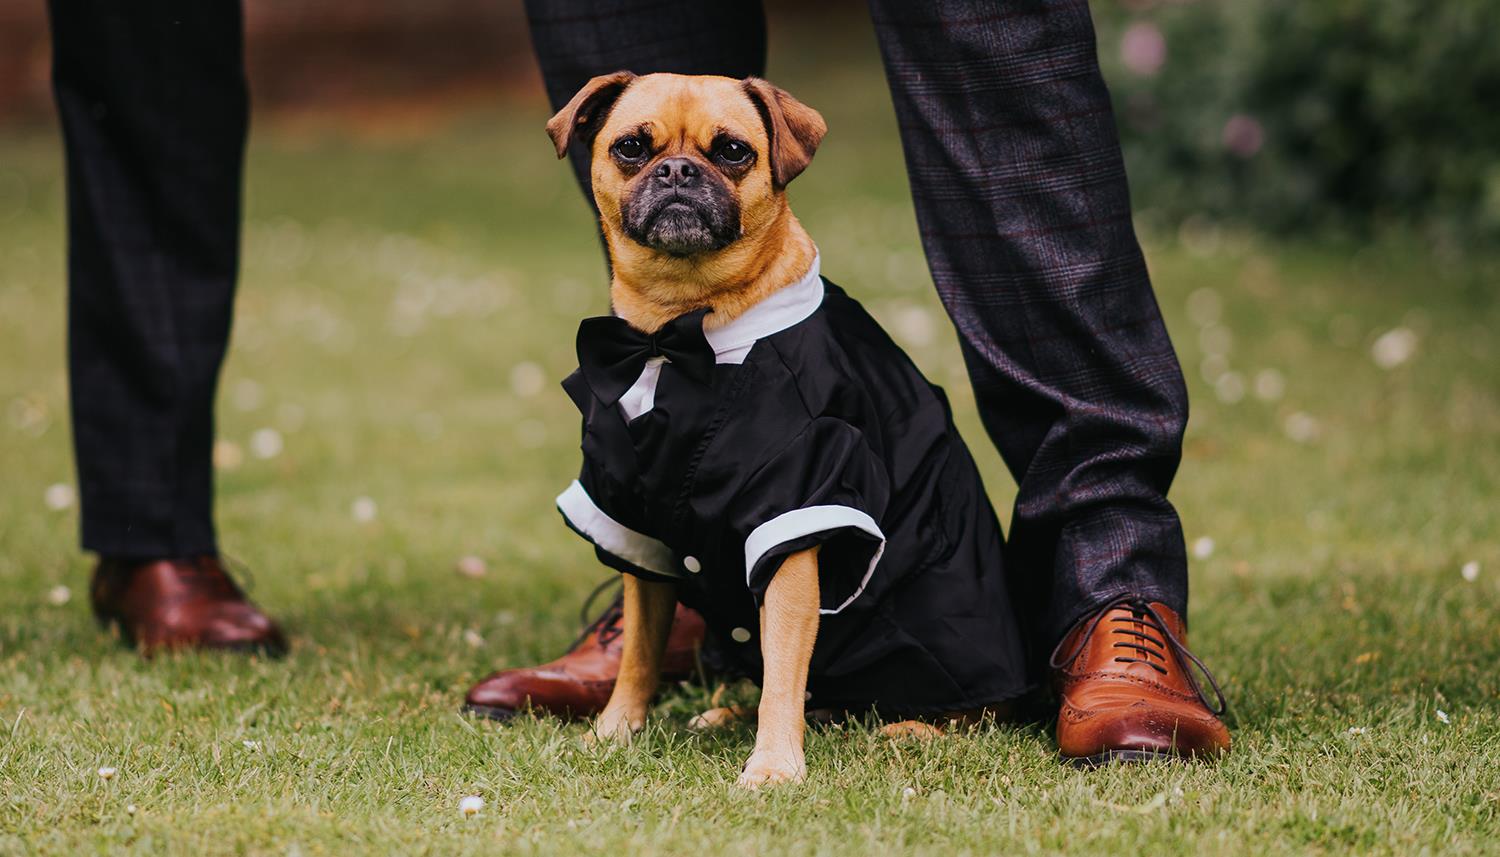 Dog dressed for wedding. Photo Credit: Charlie Bluck Photography